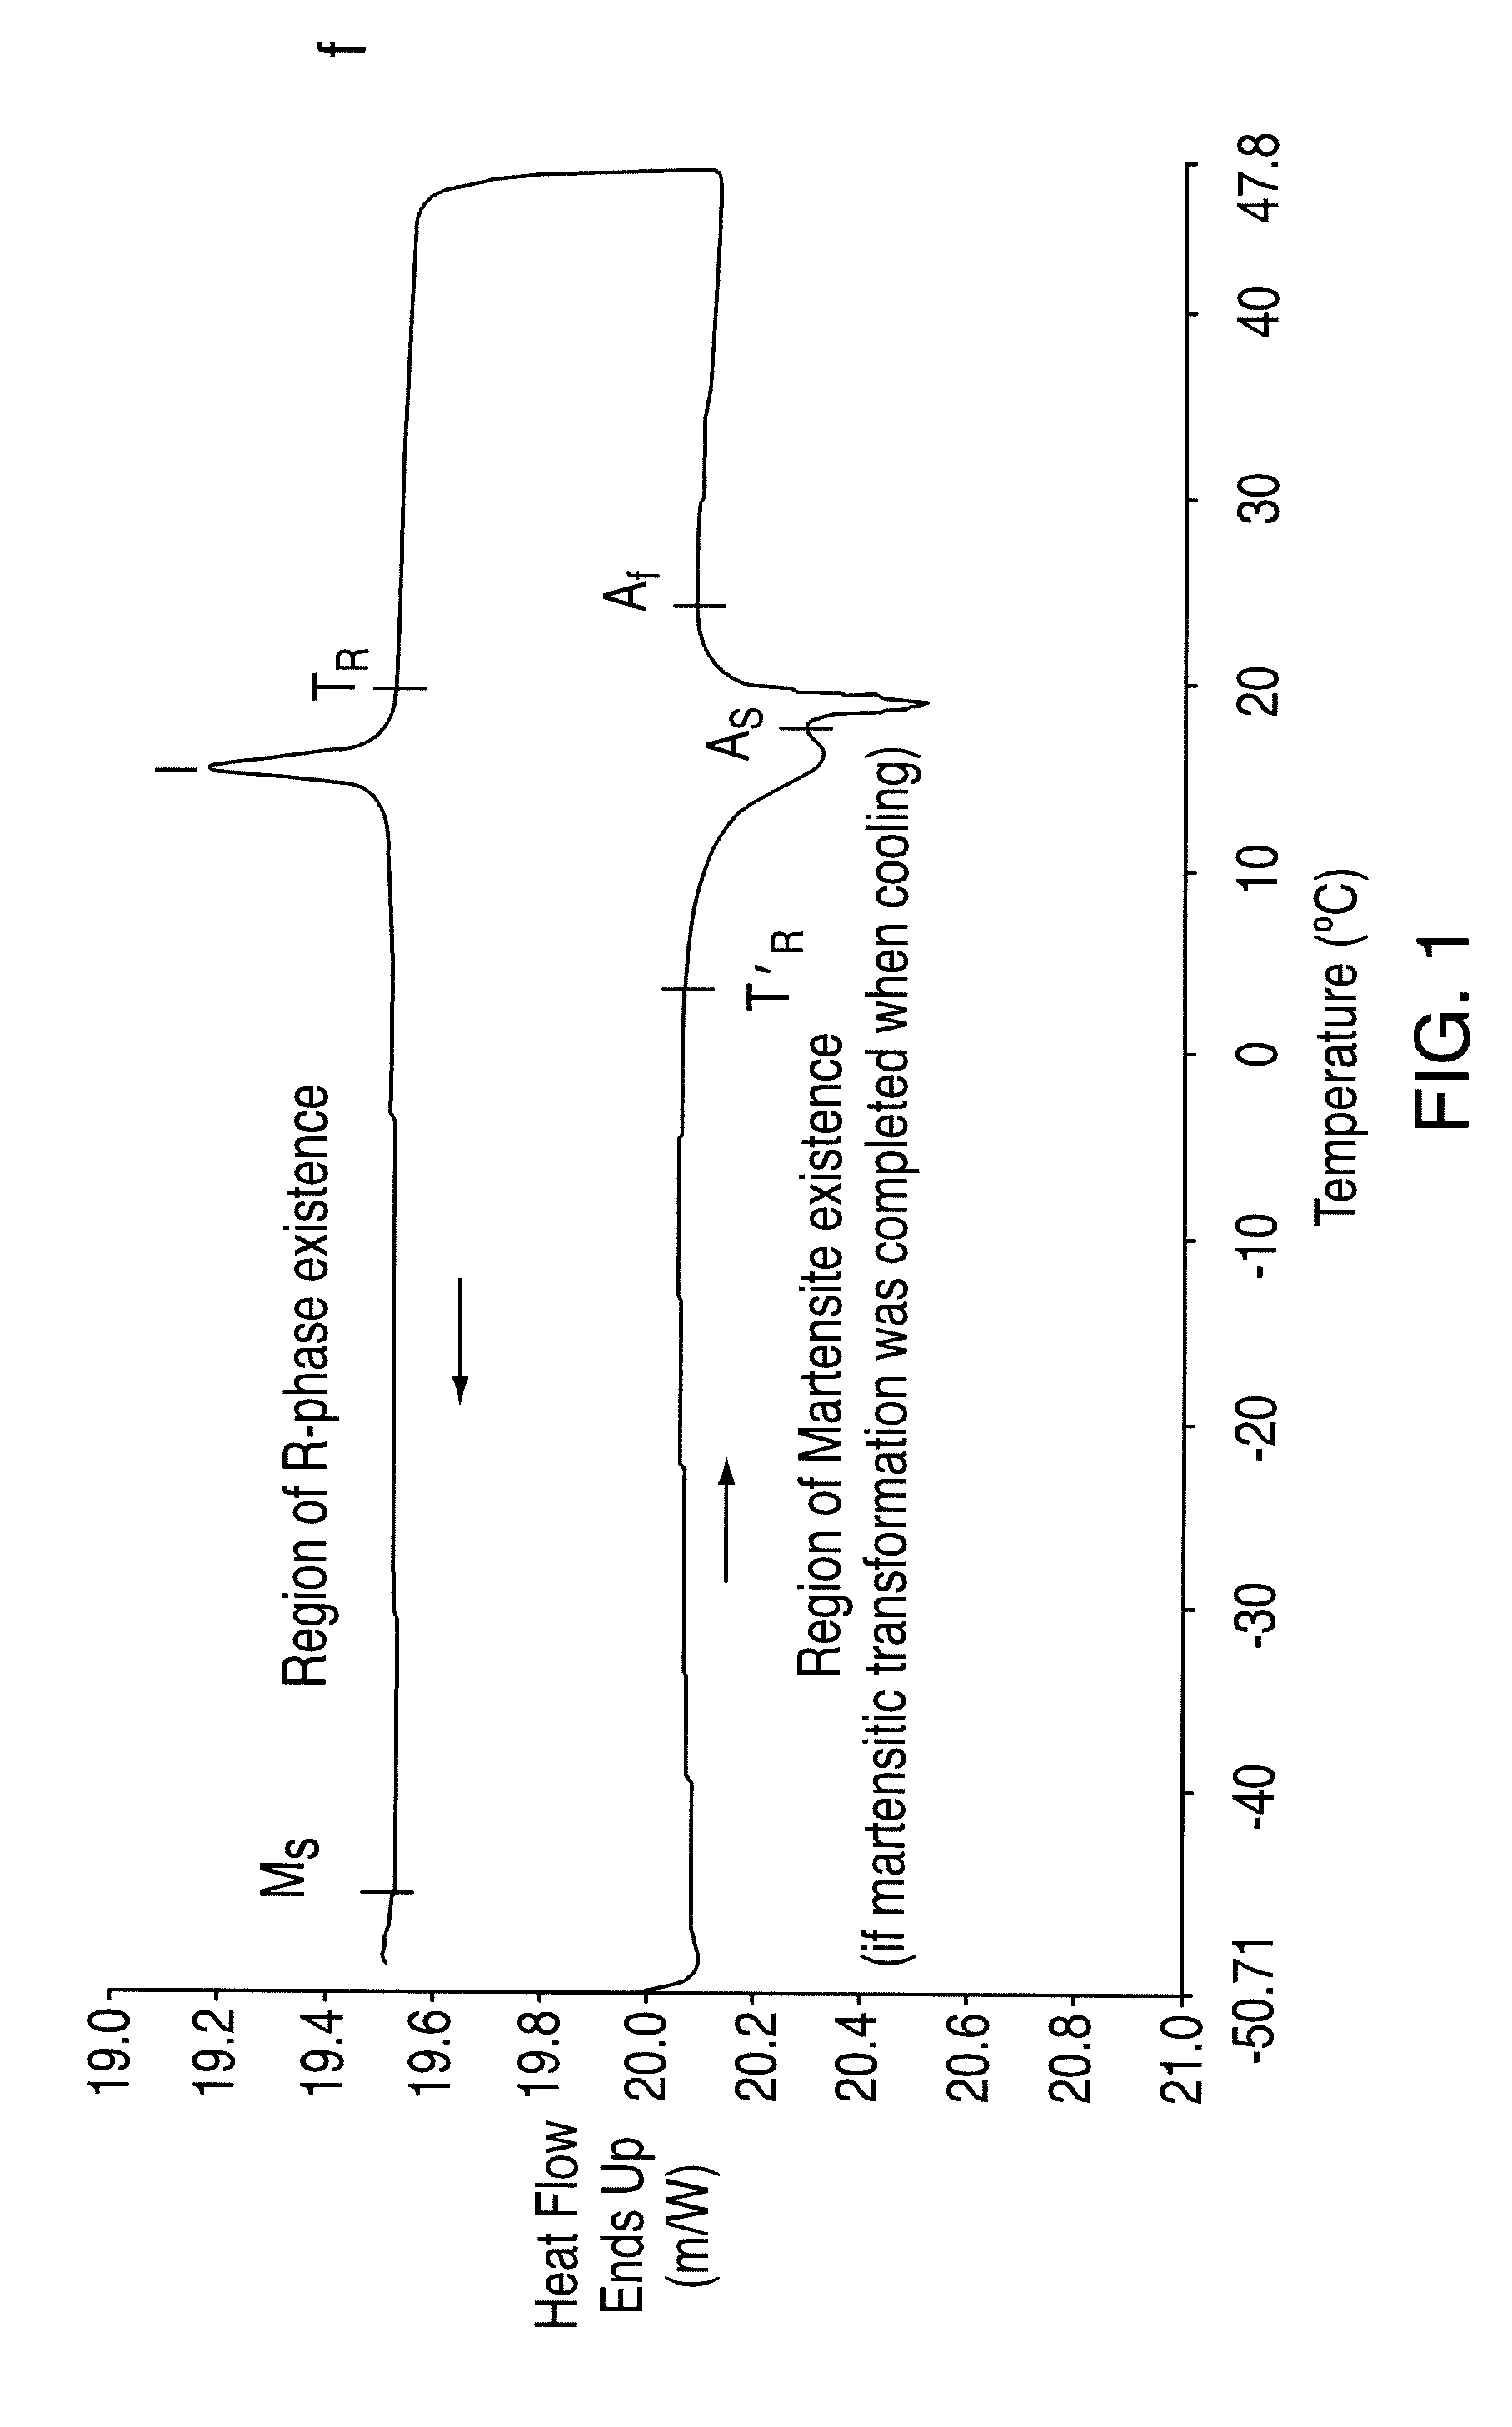 Process for inducing a two-way shape memory effect in a device formed of a shape memory alloy and a device made by the process